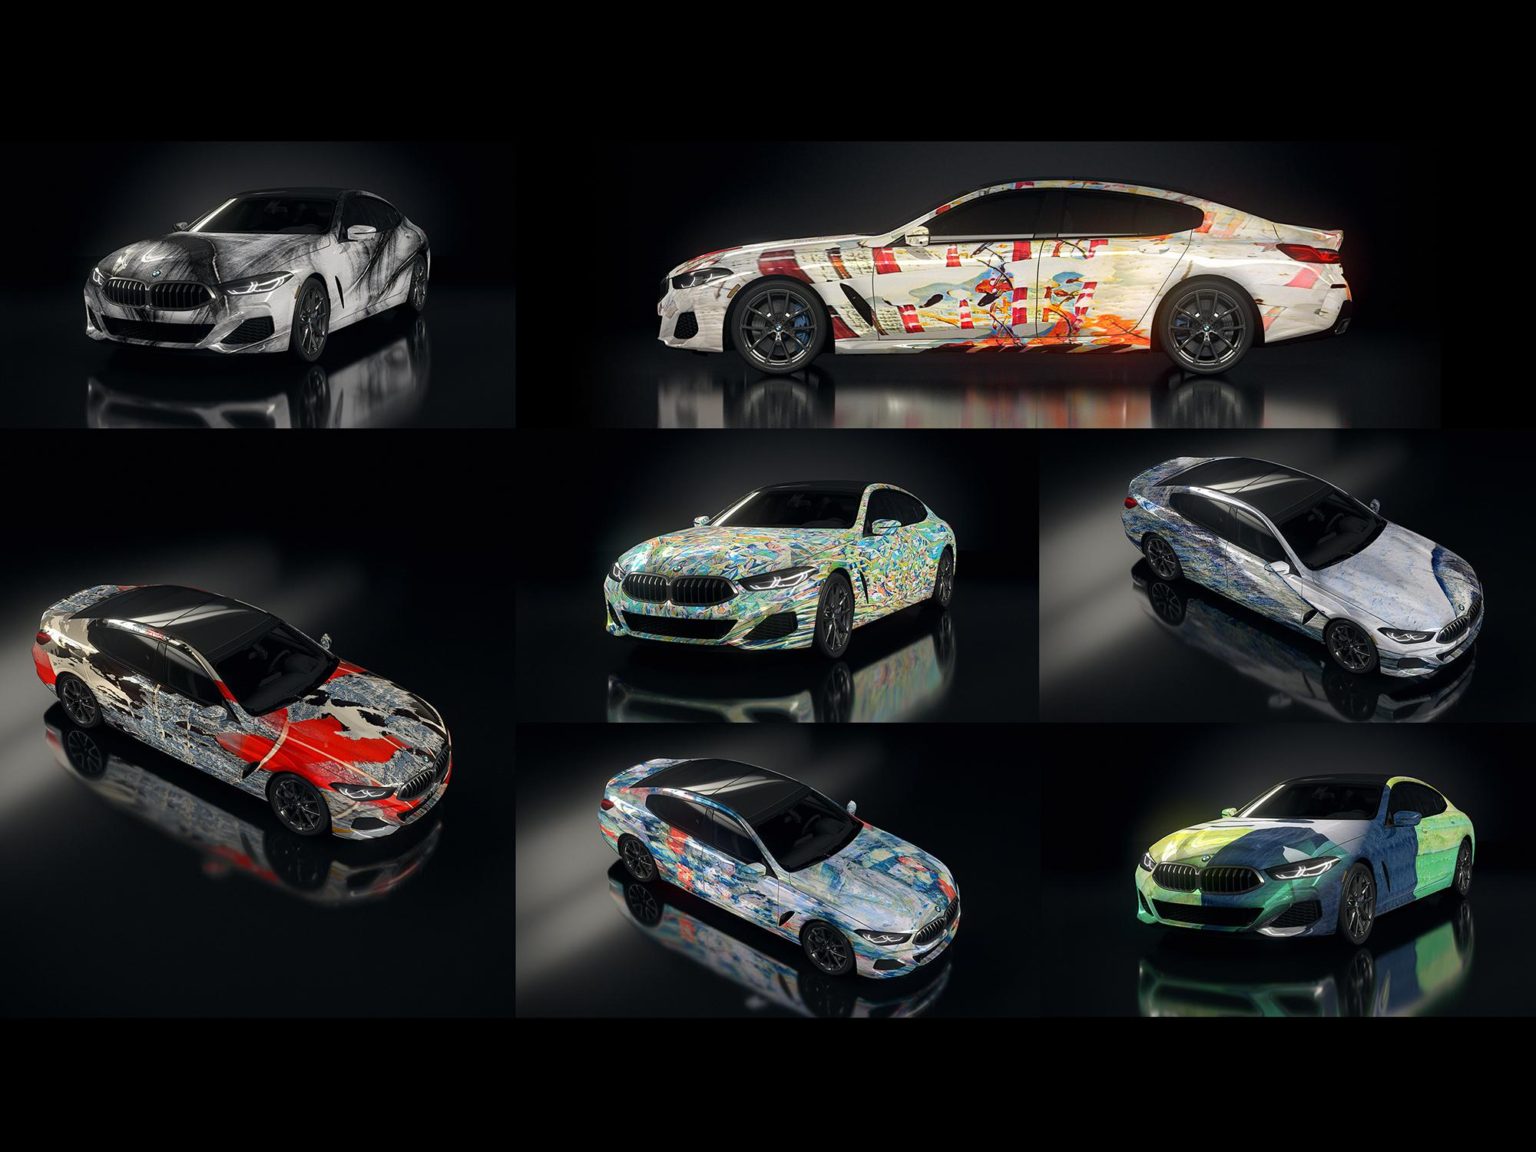 BMW's newest works are equal parts art and car.